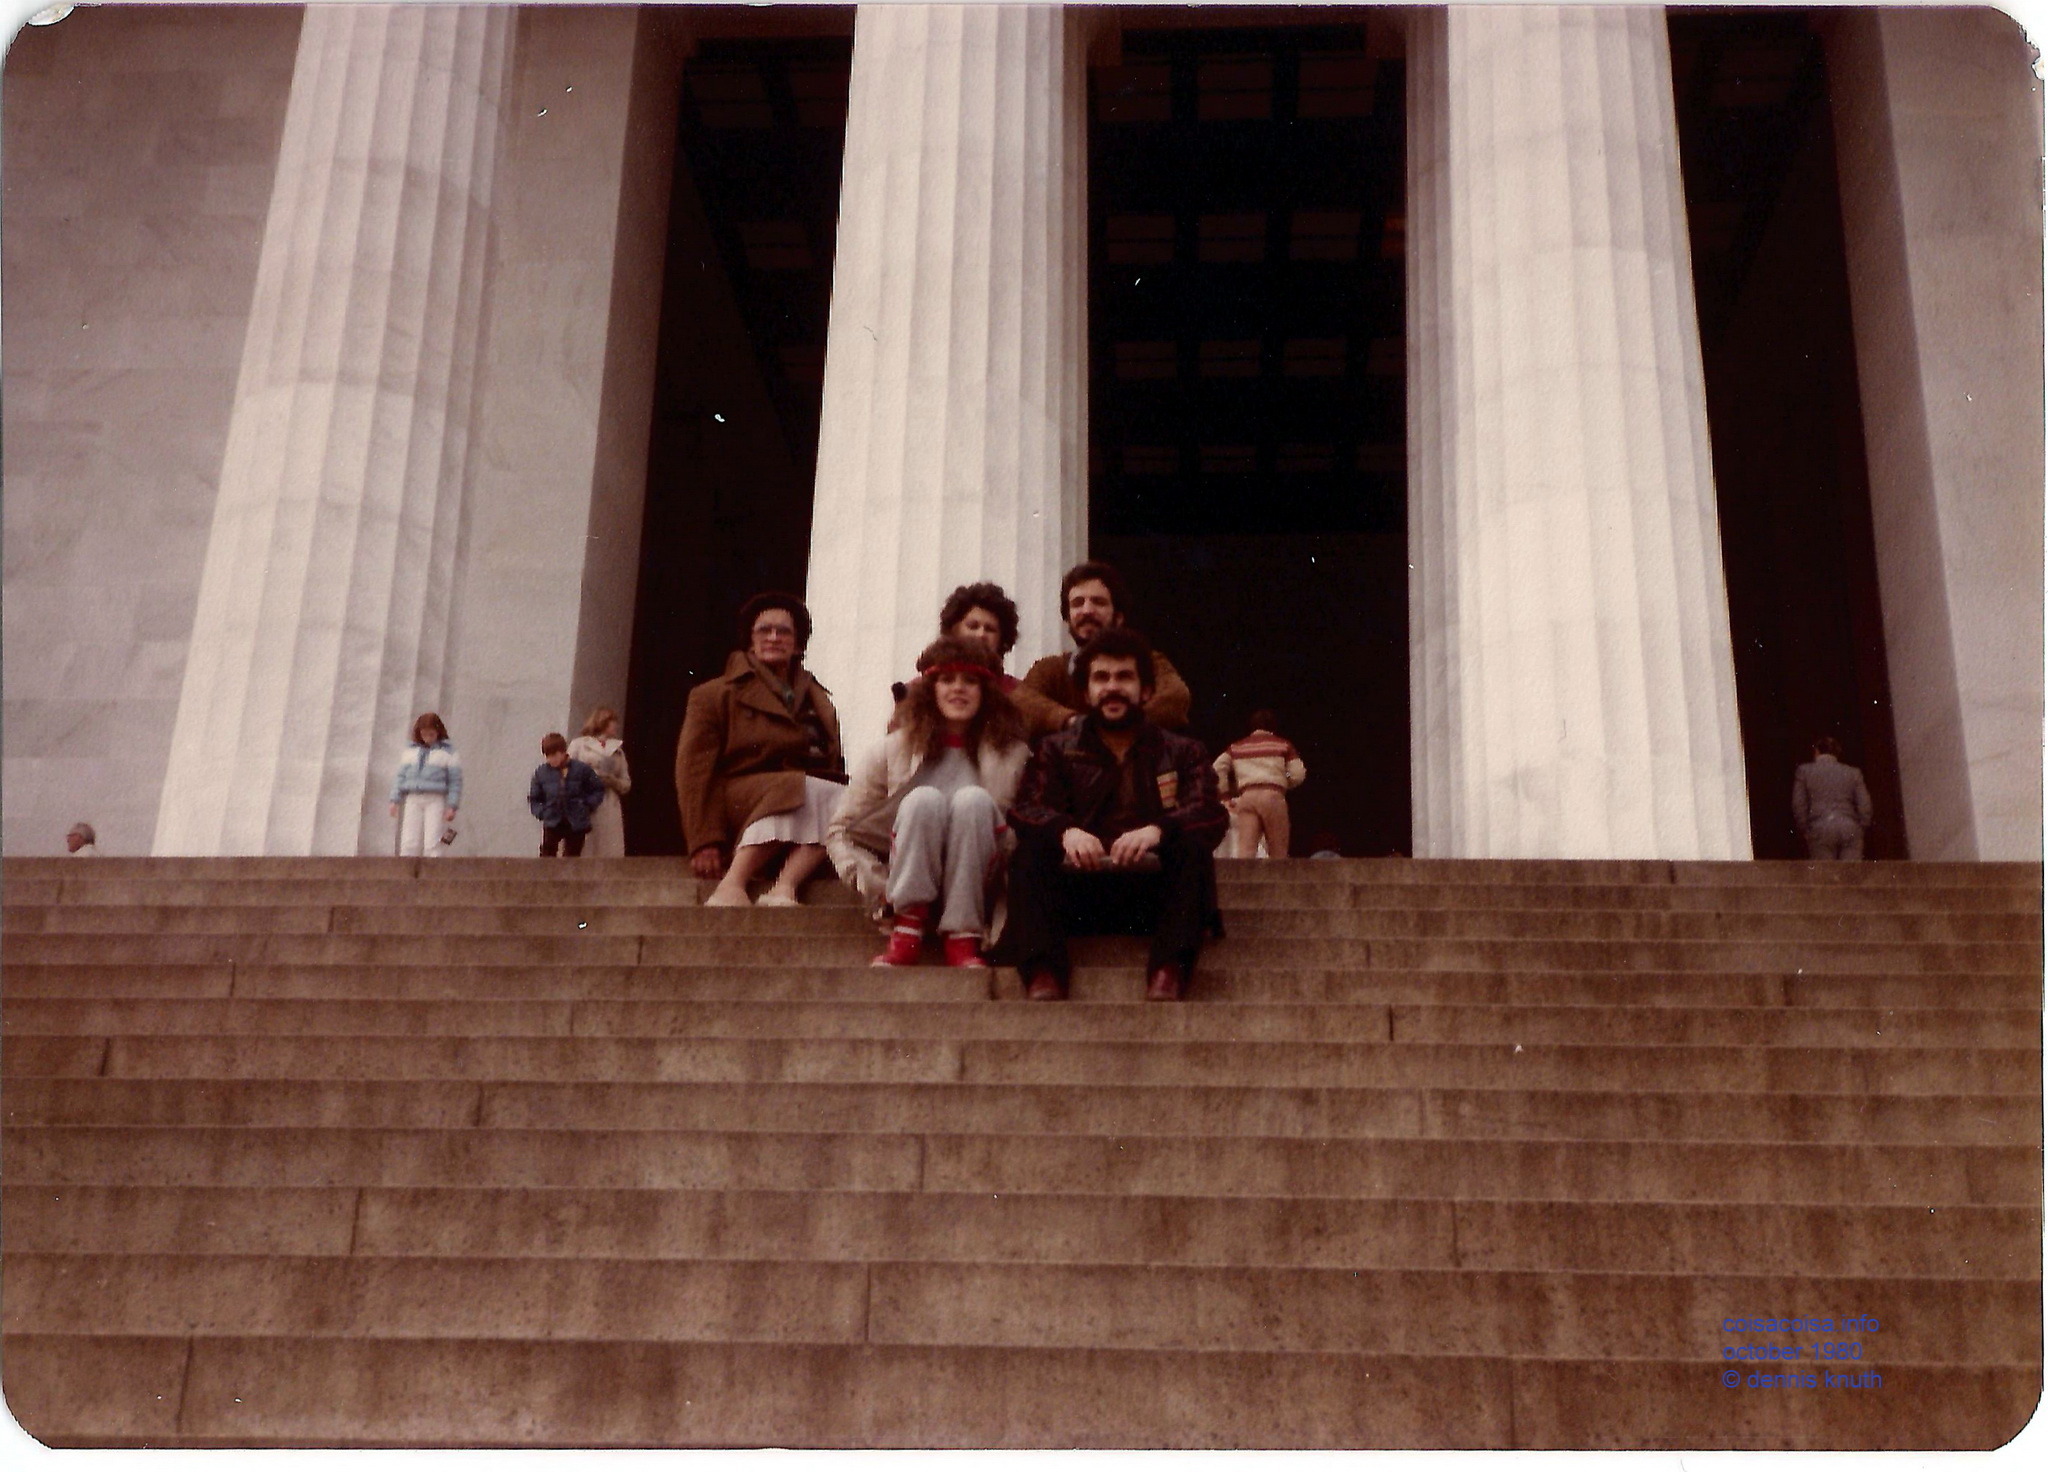 Brazilian on the steps of the Lincoln Memorial